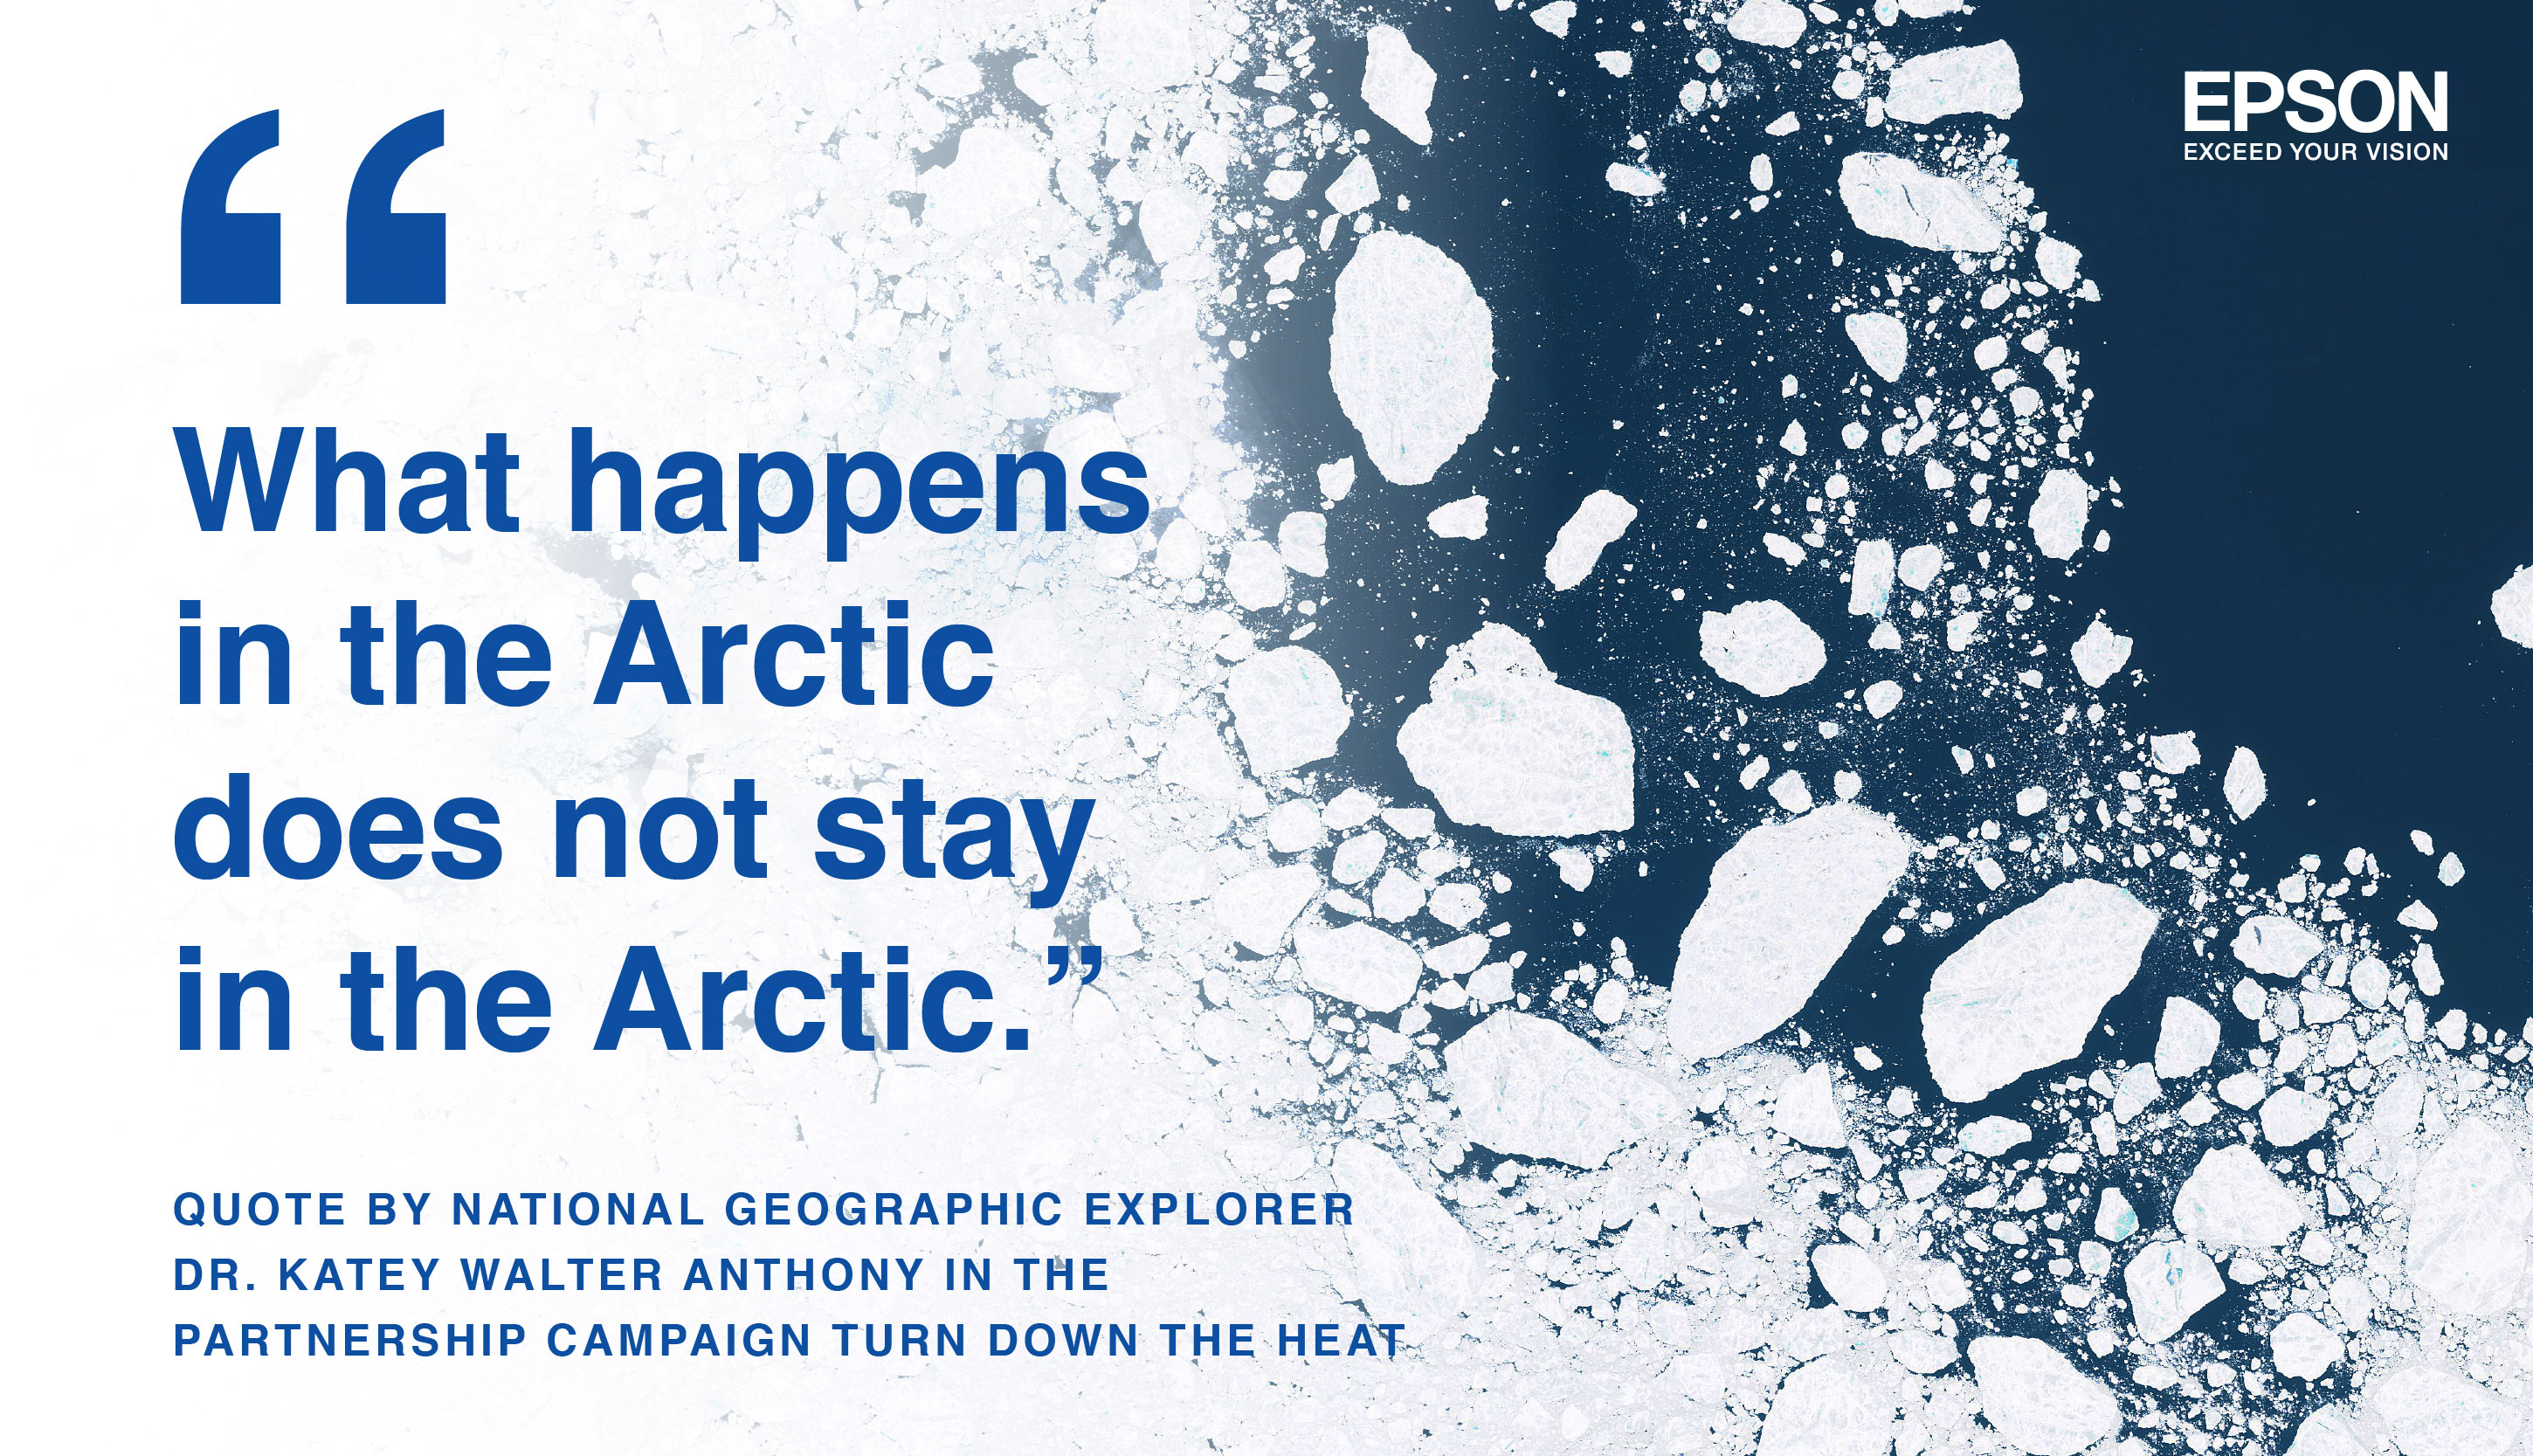 What happens in the Arctic does not stay in the Arctic